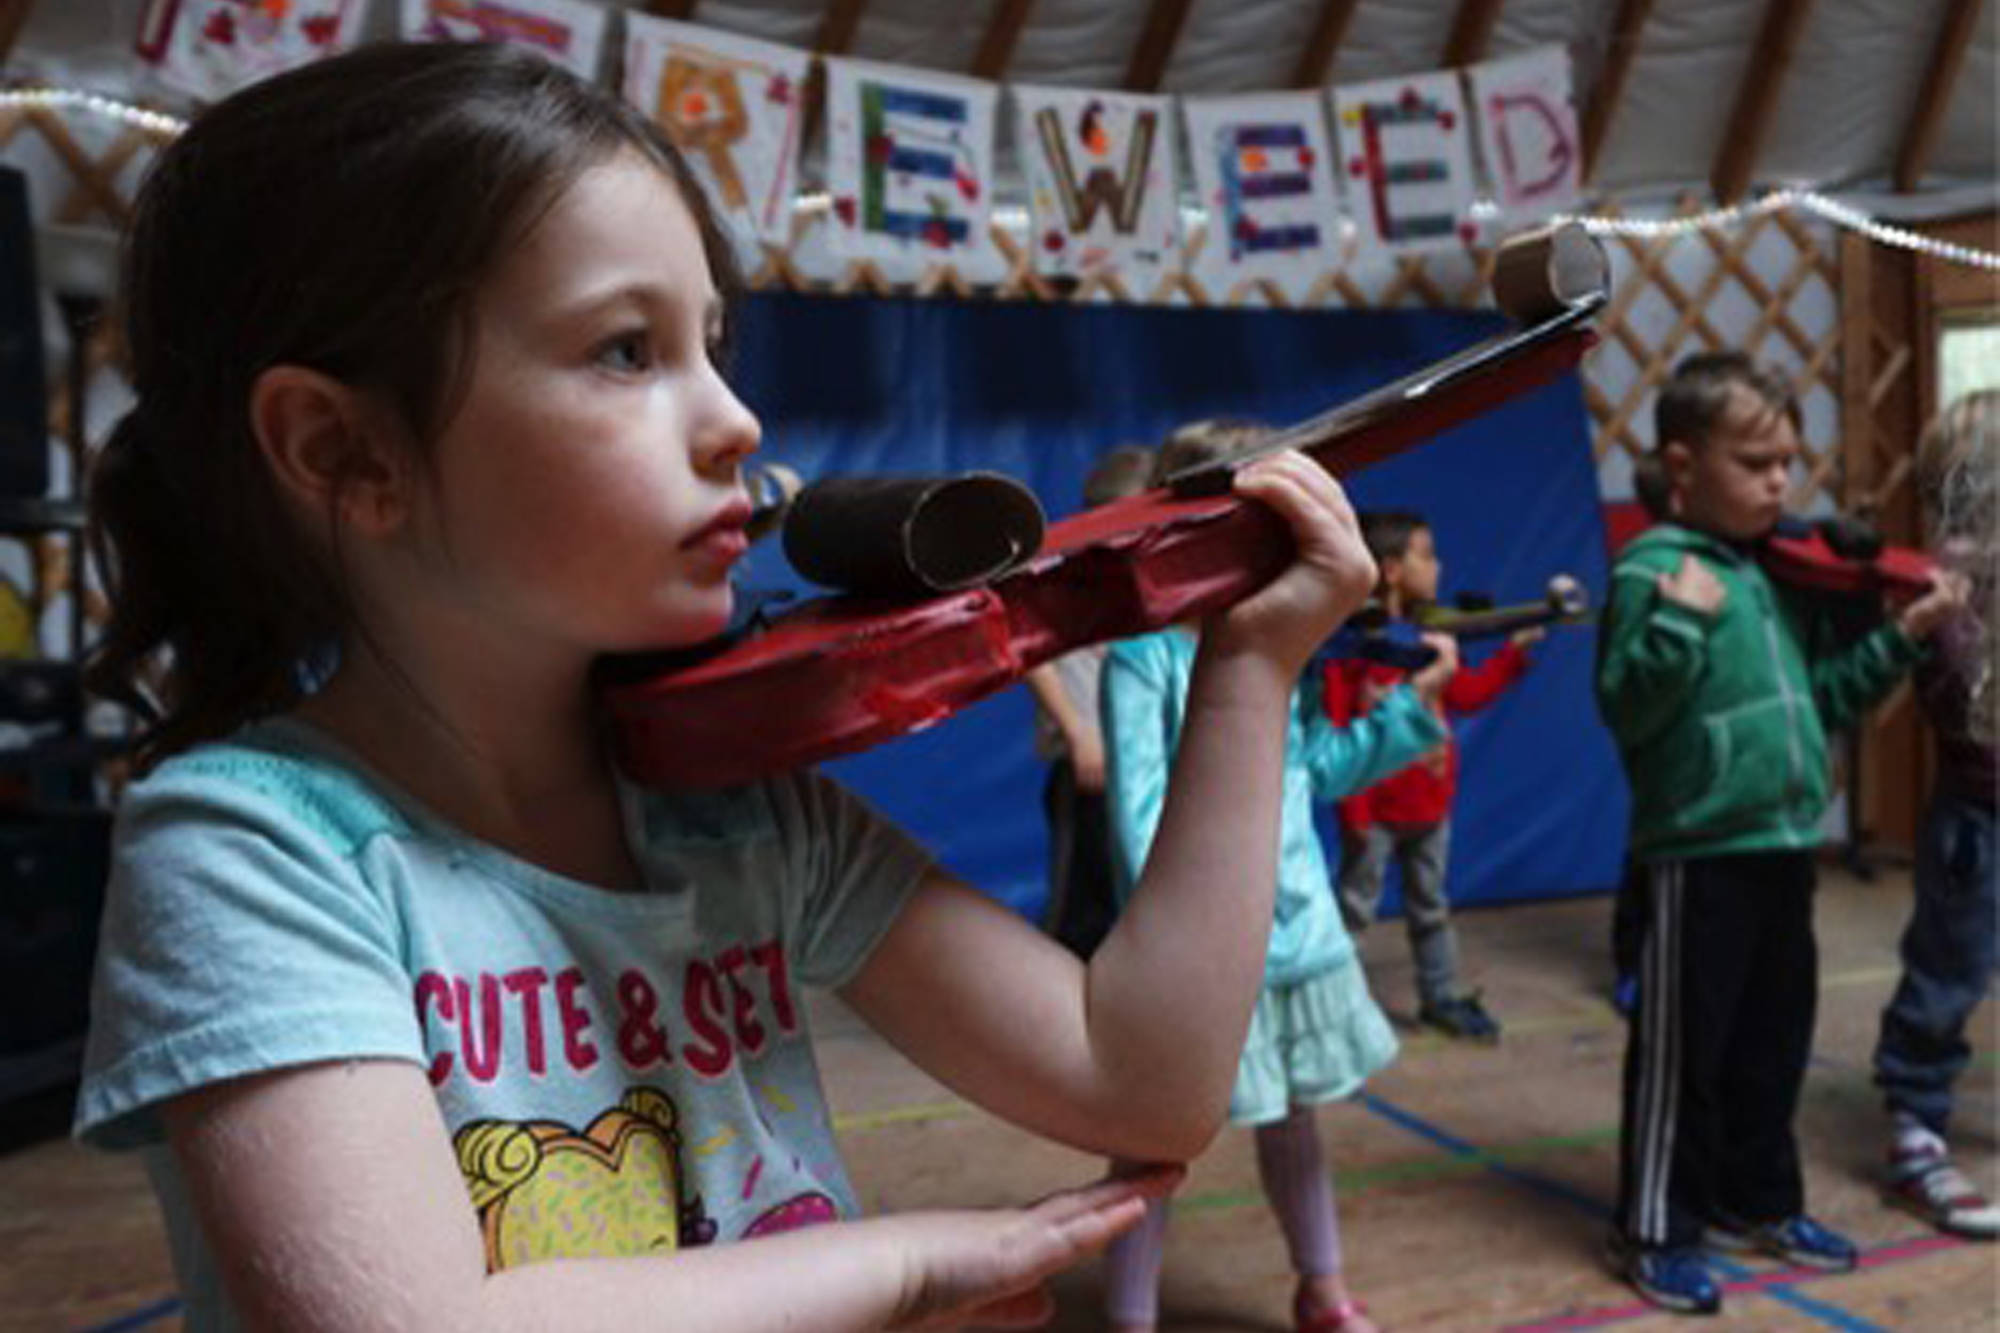 First grade student Elizabeth Parke practices holding a cardboard violin, in anticipation of the real thing, at Fireweed Academy in Homer, Alaska. (Photo by Miranda Weiss)